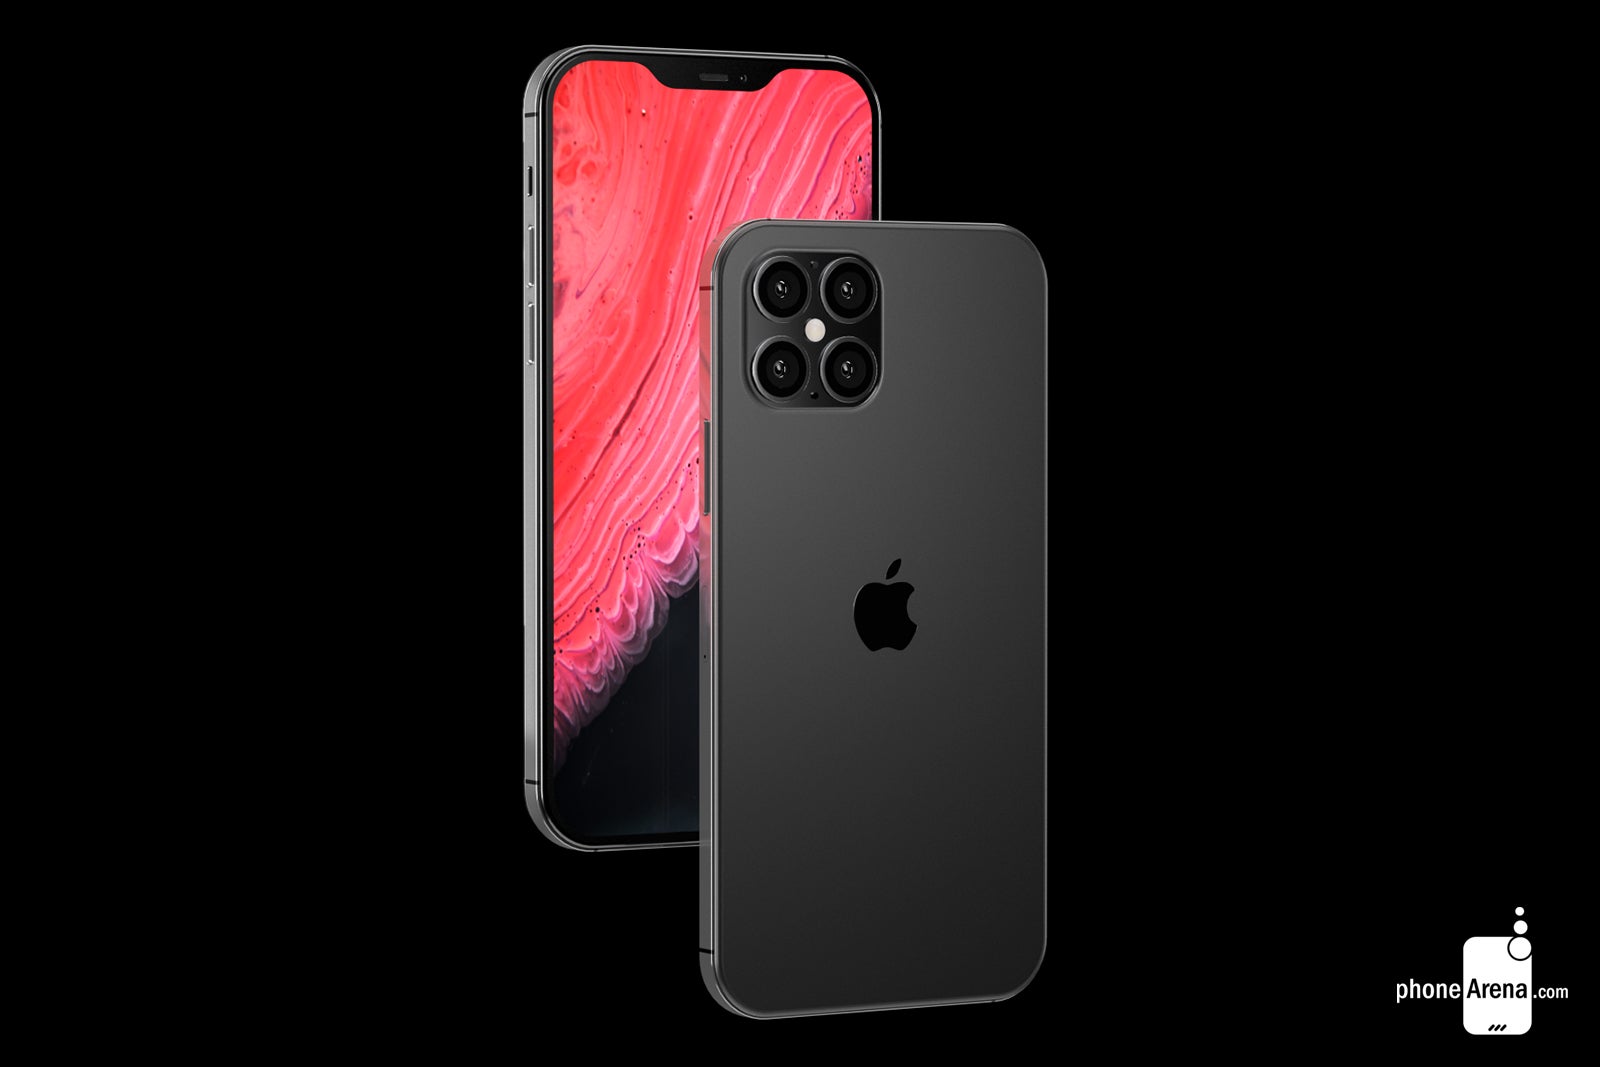 Apple iPhone 12 Pro concept render - iPhone 12 Pro Max to feature key camera upgrades, but no periscope lens